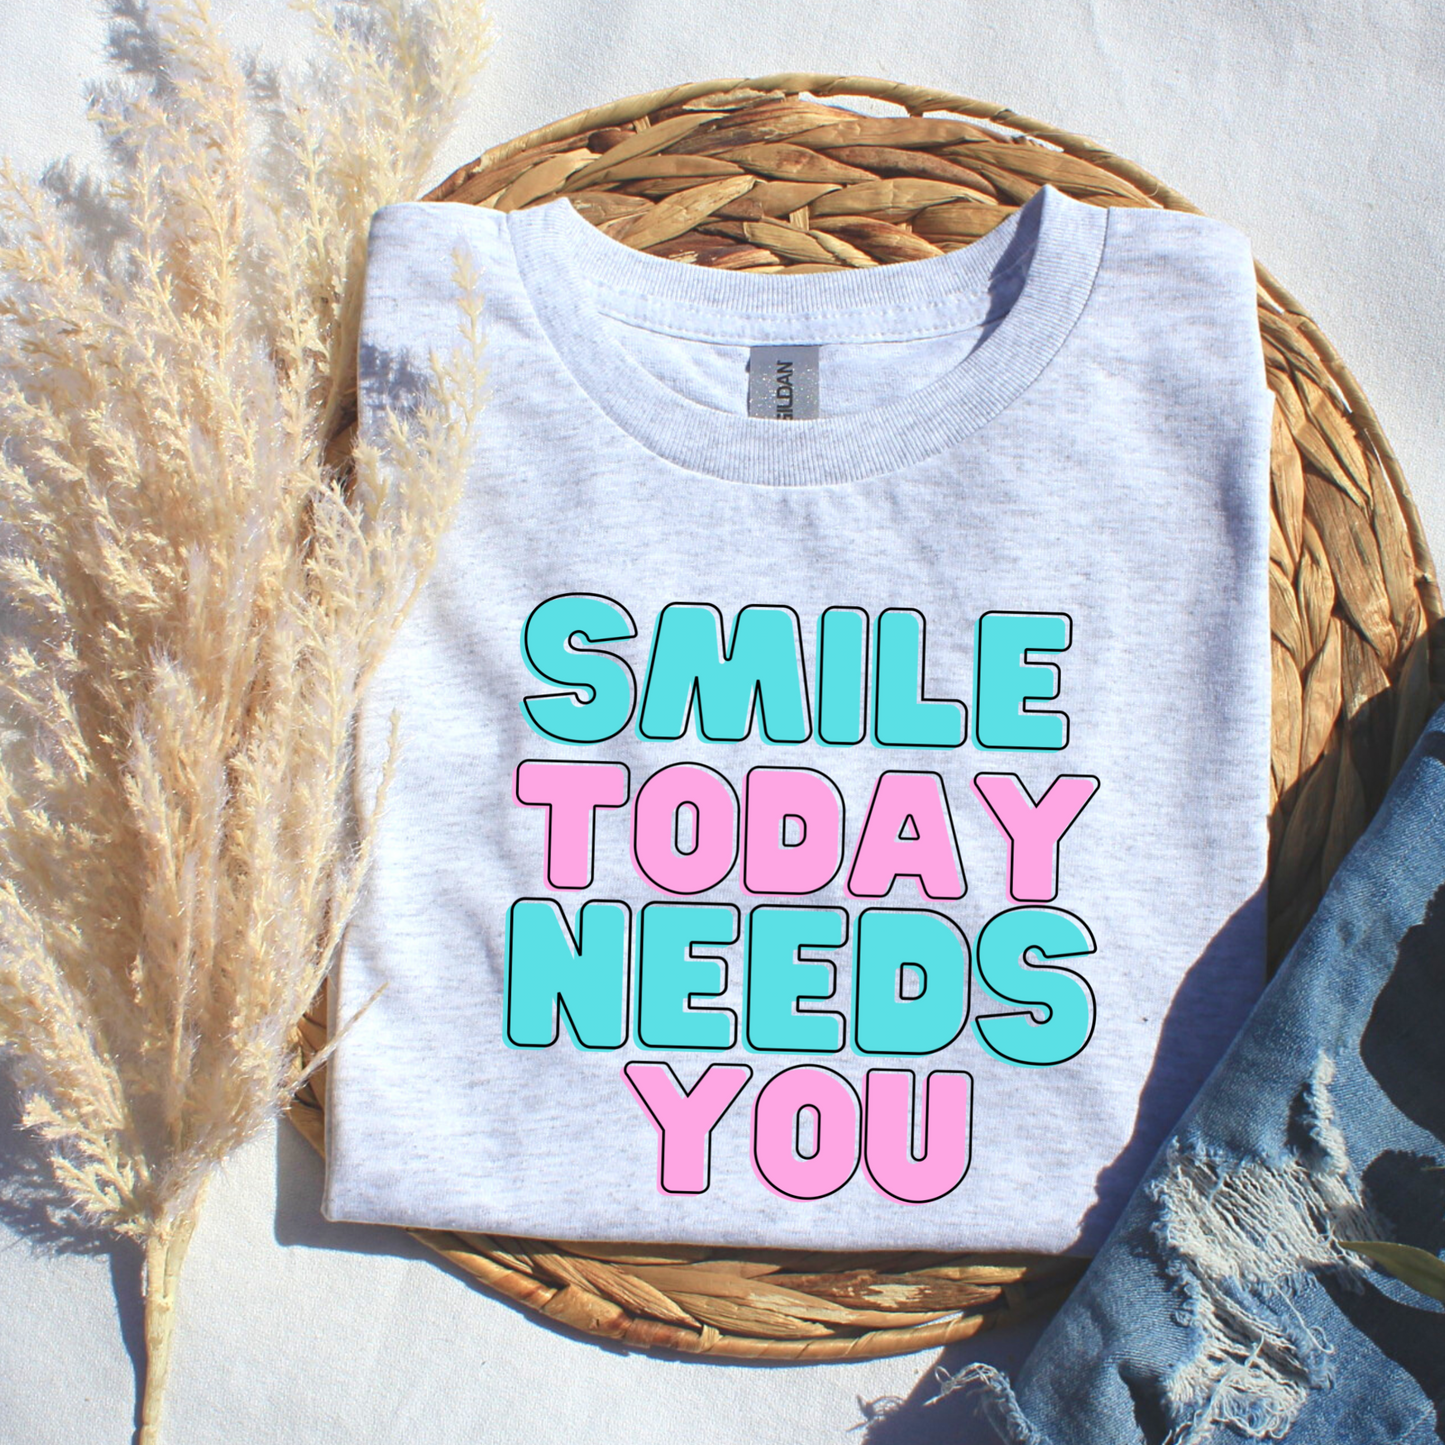 Smile today needs you